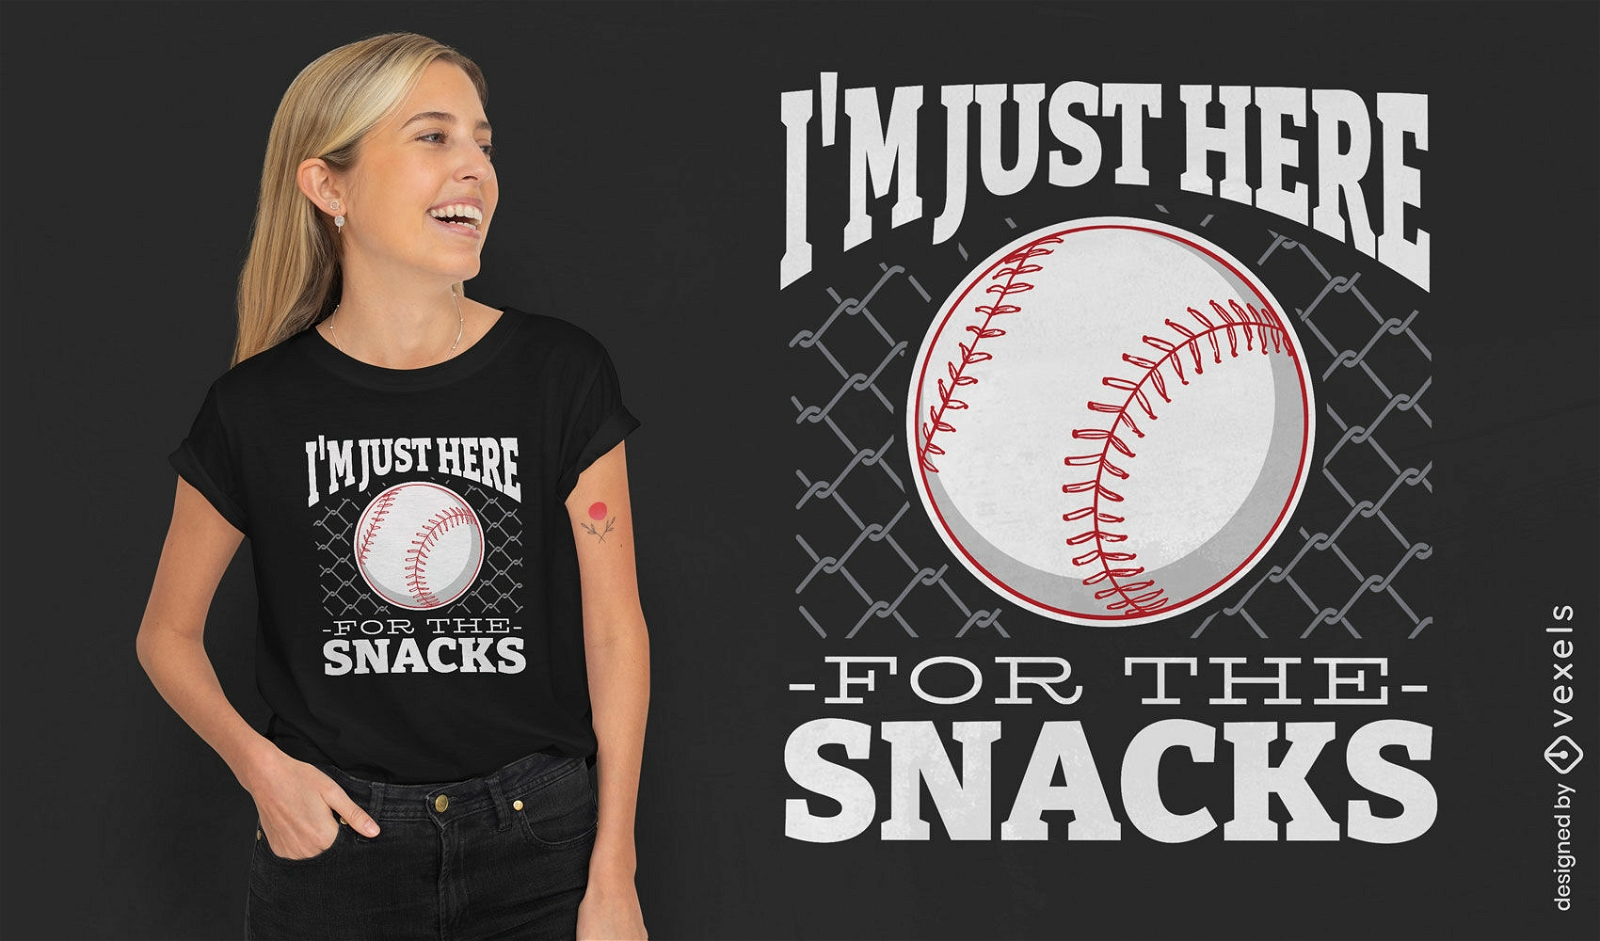 Baseball and snacks quote t-shirt design